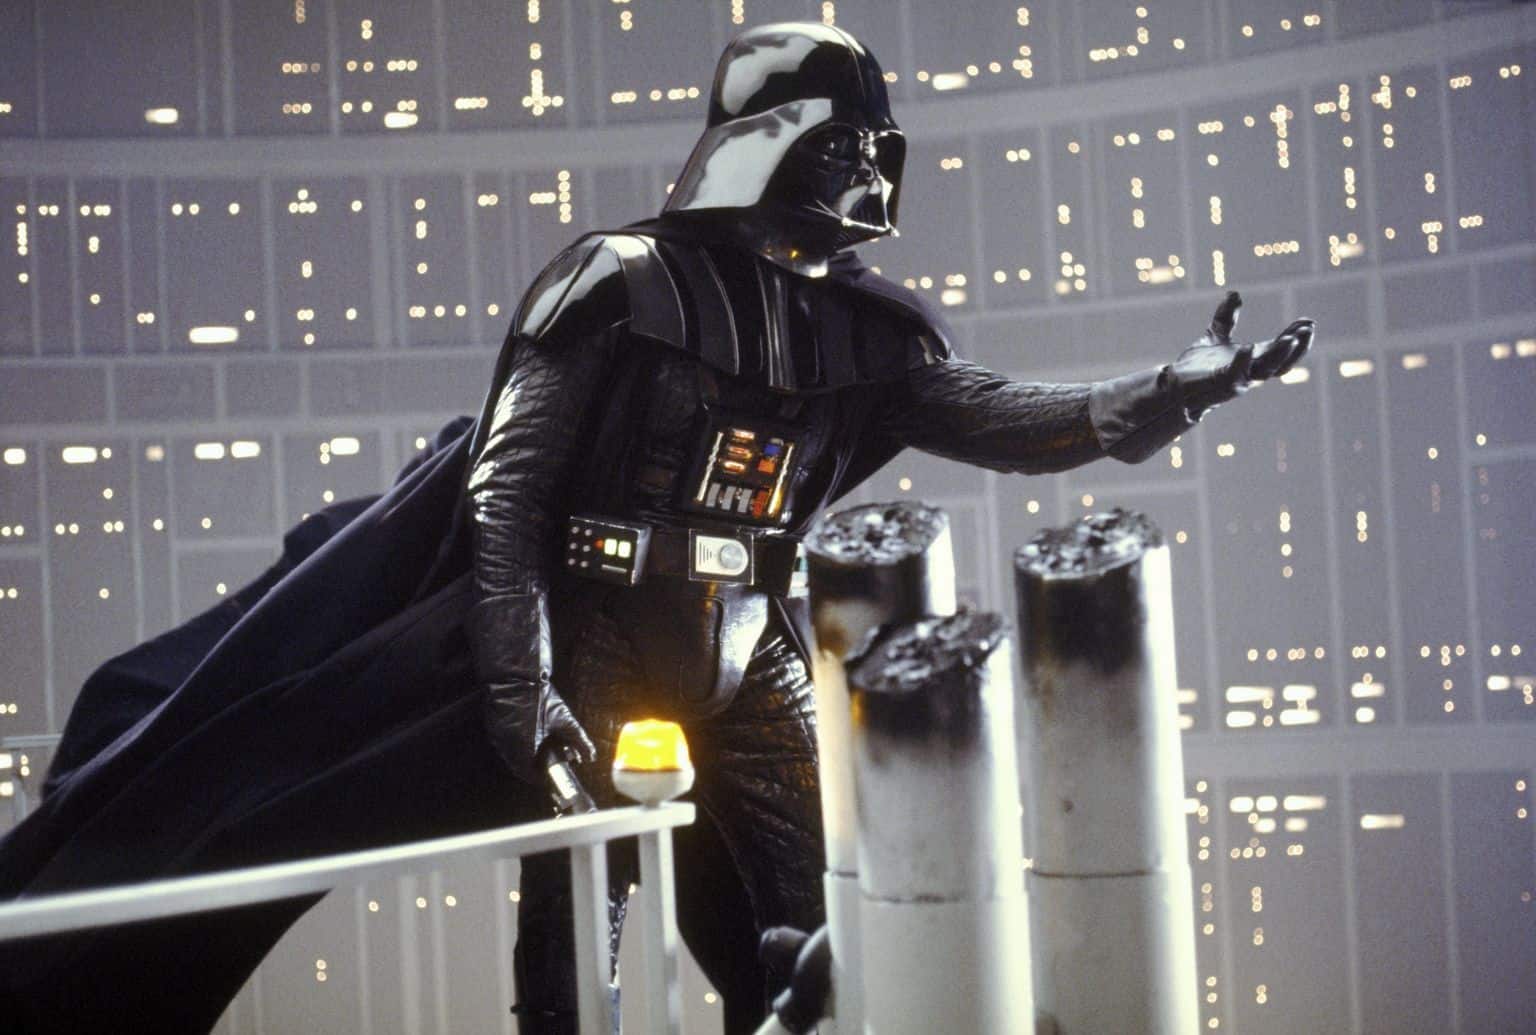 David Prowse as Darth Vader in Star Wars Episode V - The Empire Strikes Back 